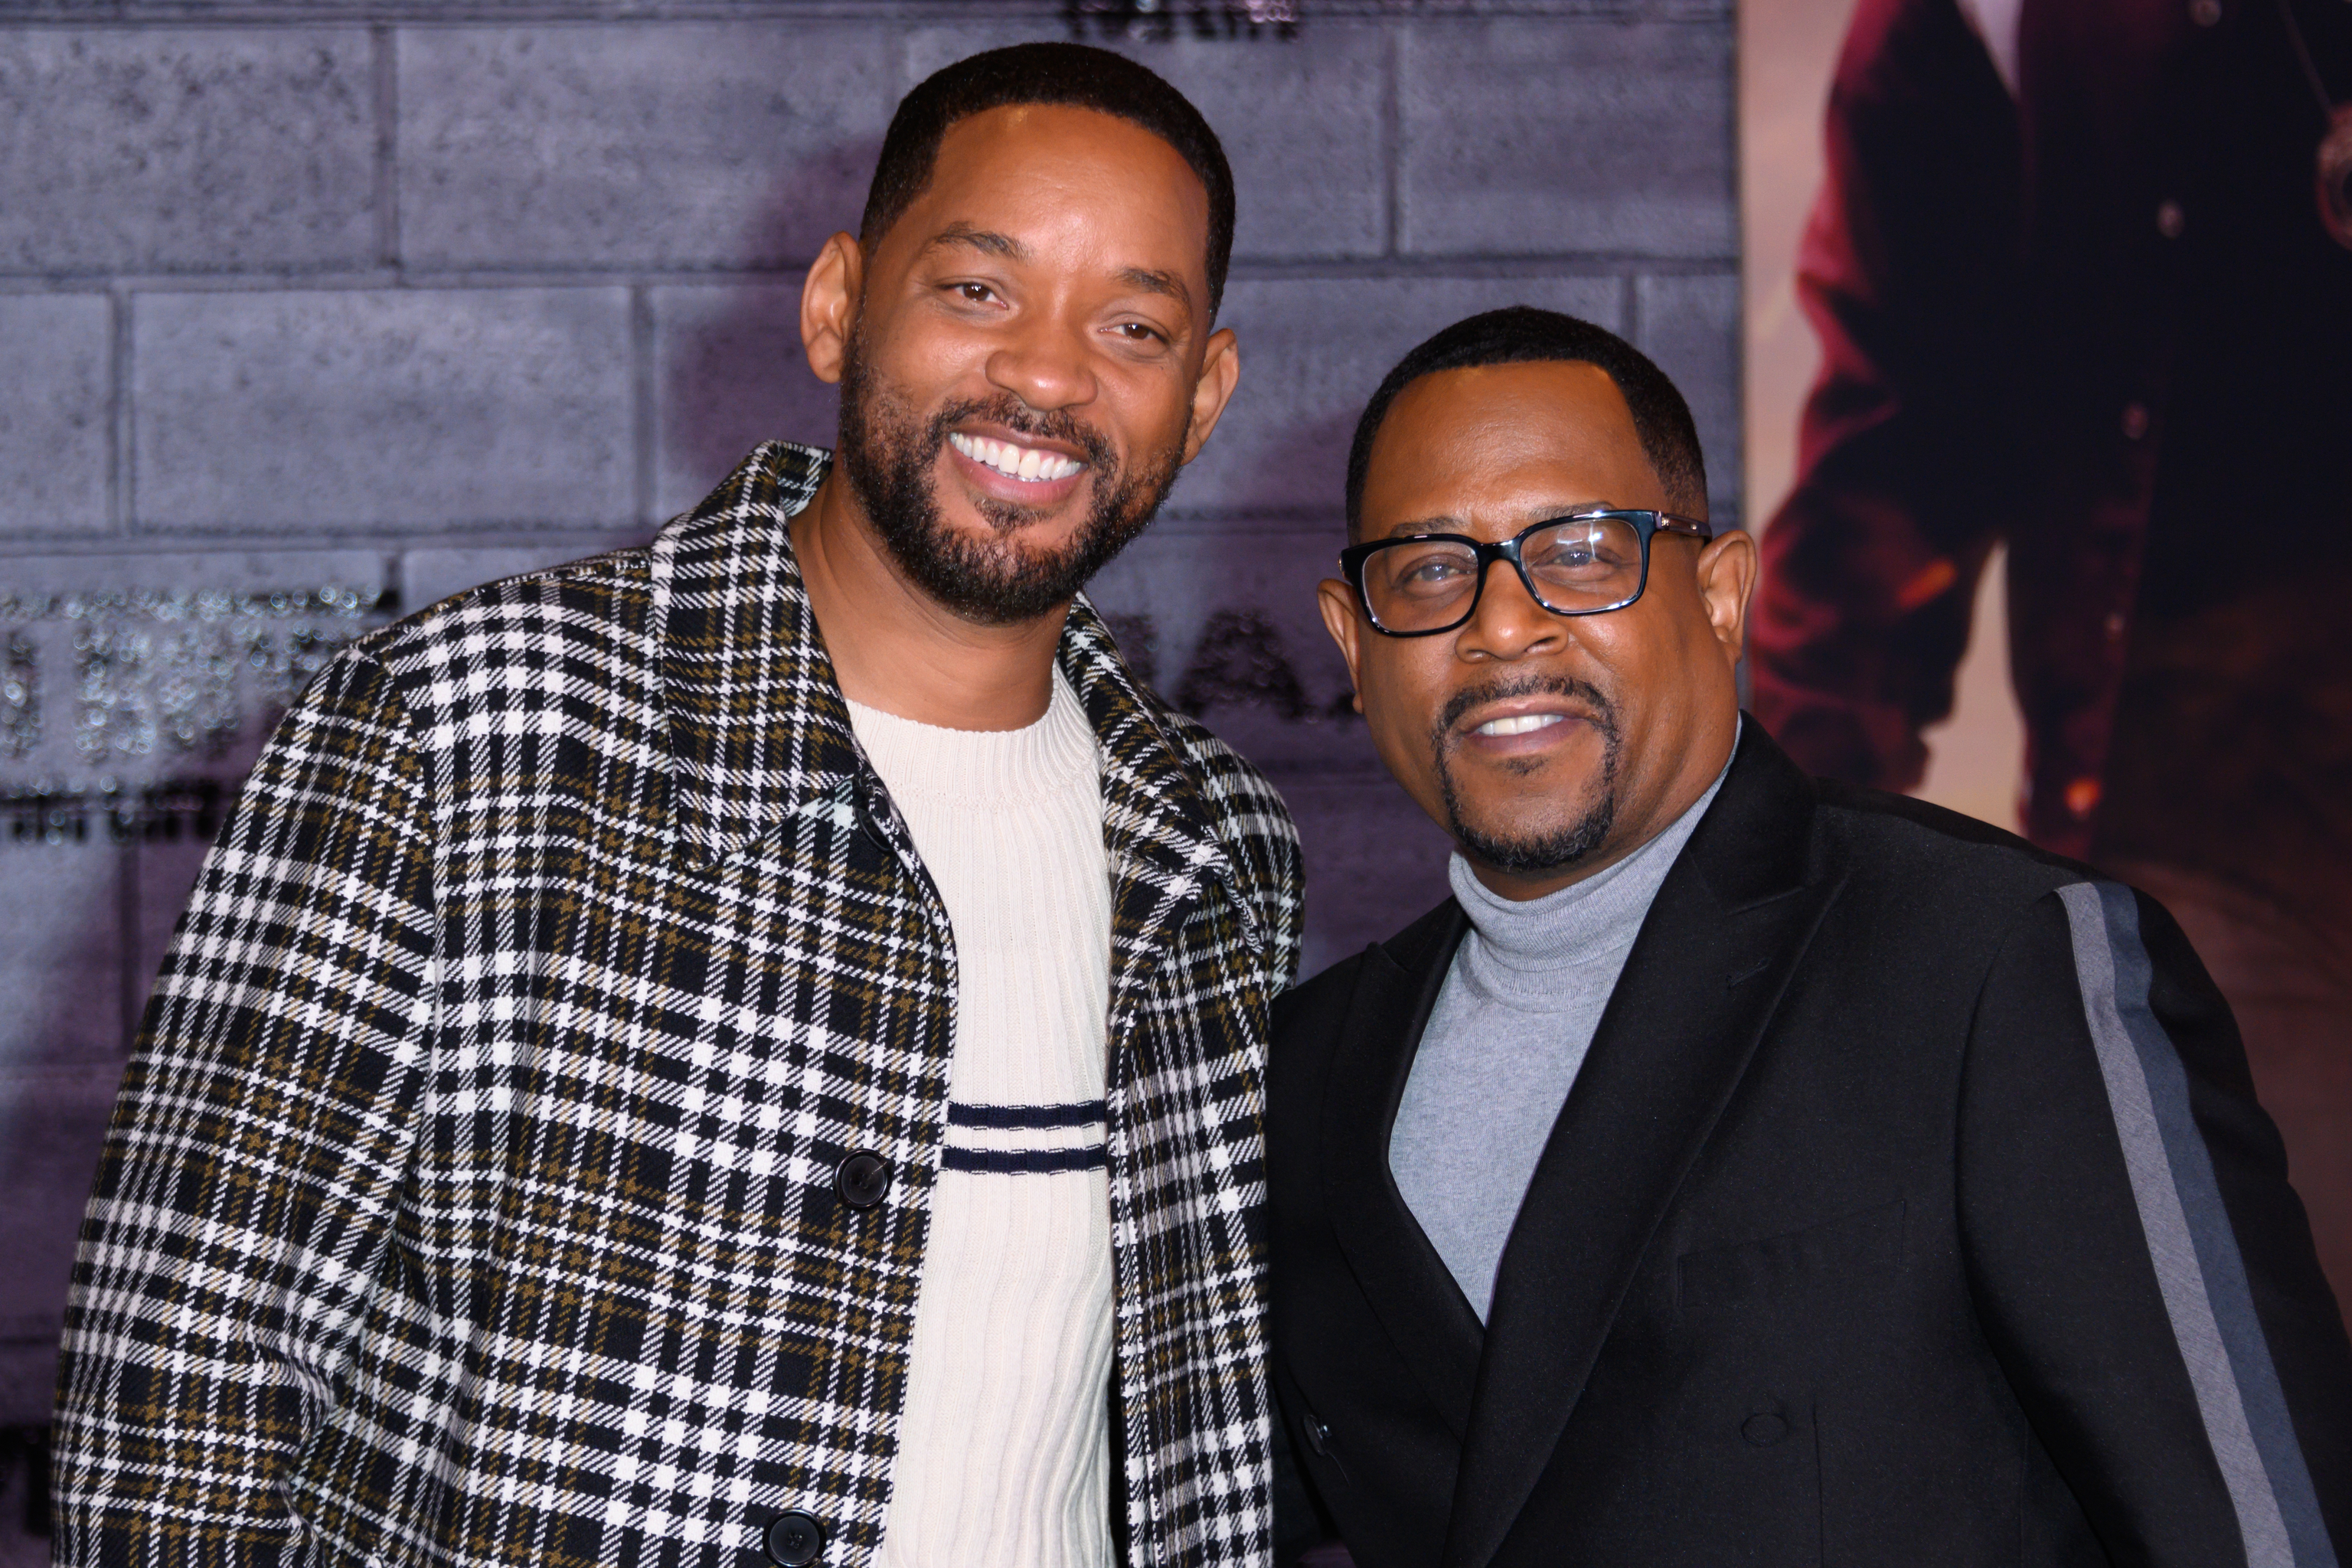 Will Smith and Martin Lawrence at the Premiere of "Bad Boys For Life"